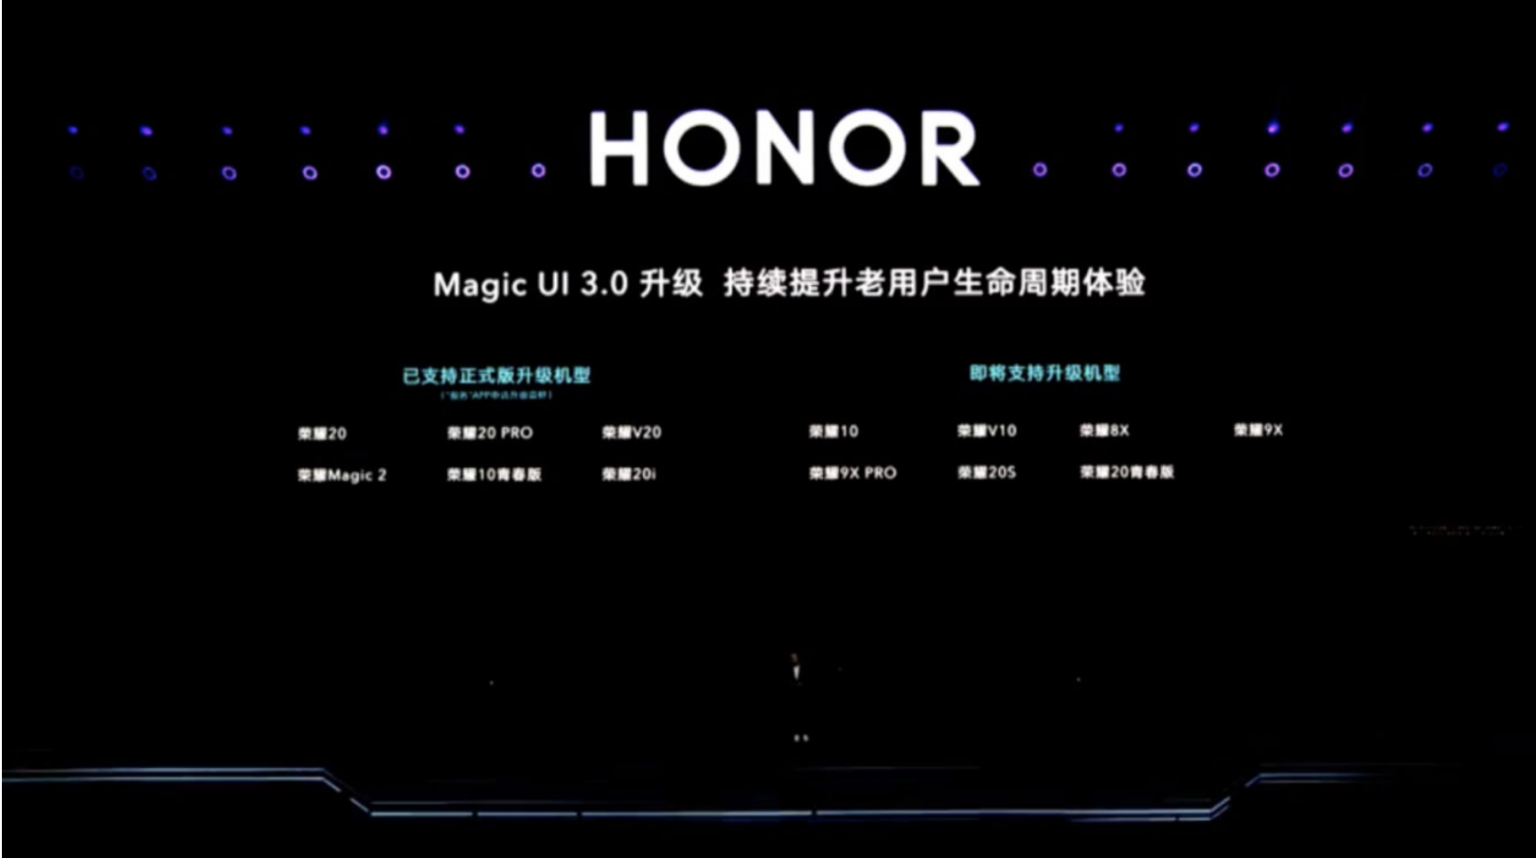 Honor Magic UI 3.0 Update: Features and Device List